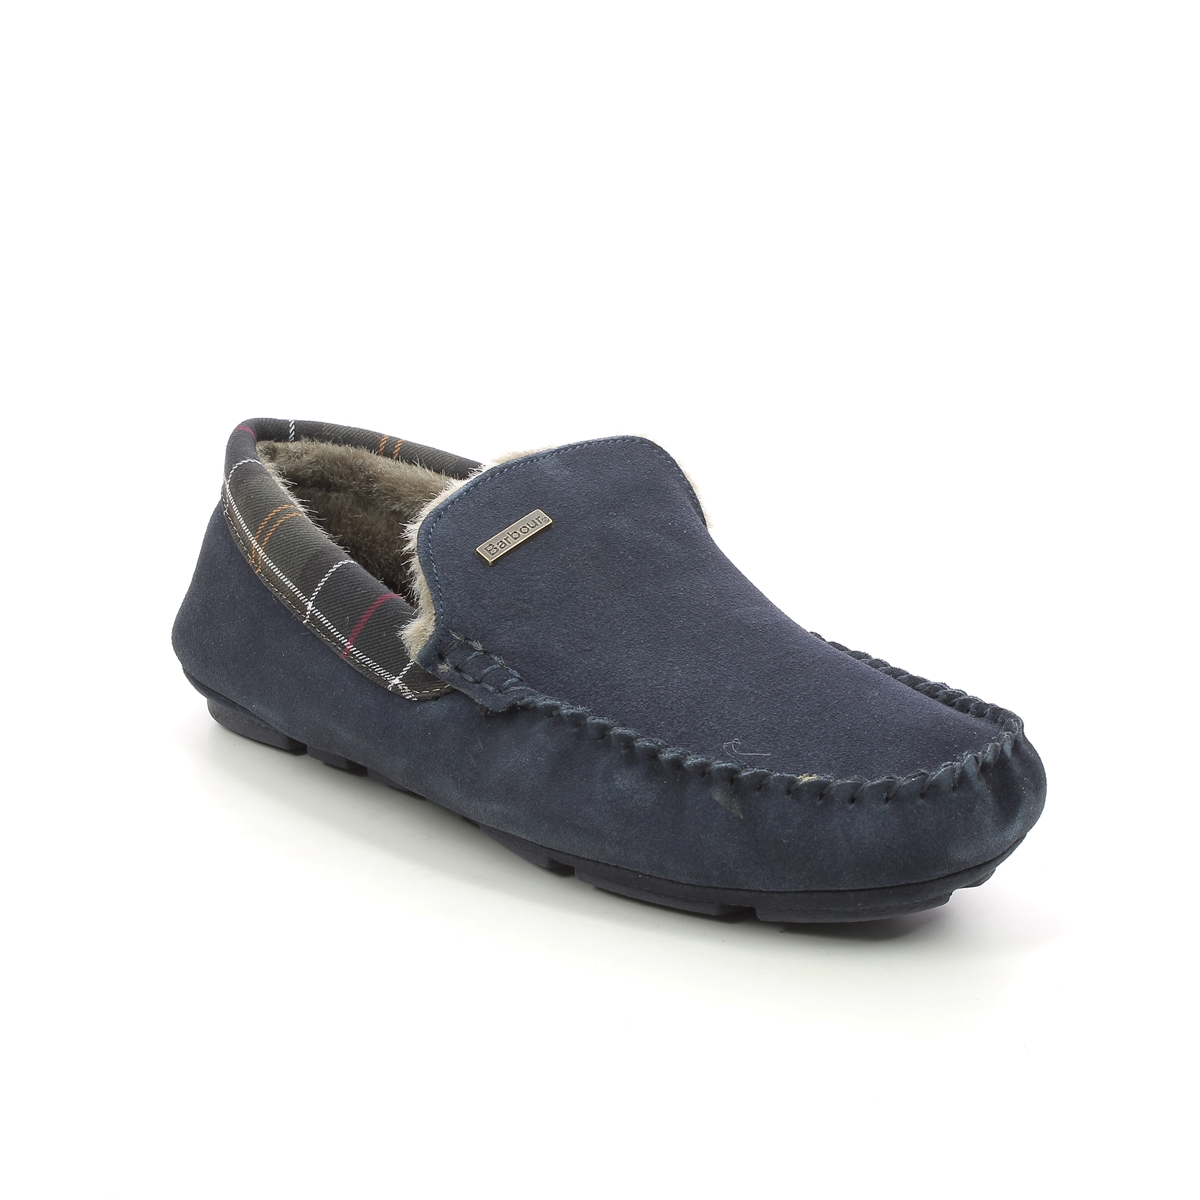 Barbour Monty Navy suede Mens slippers MSL0001-NY52 in a Plain Leather in Size 7